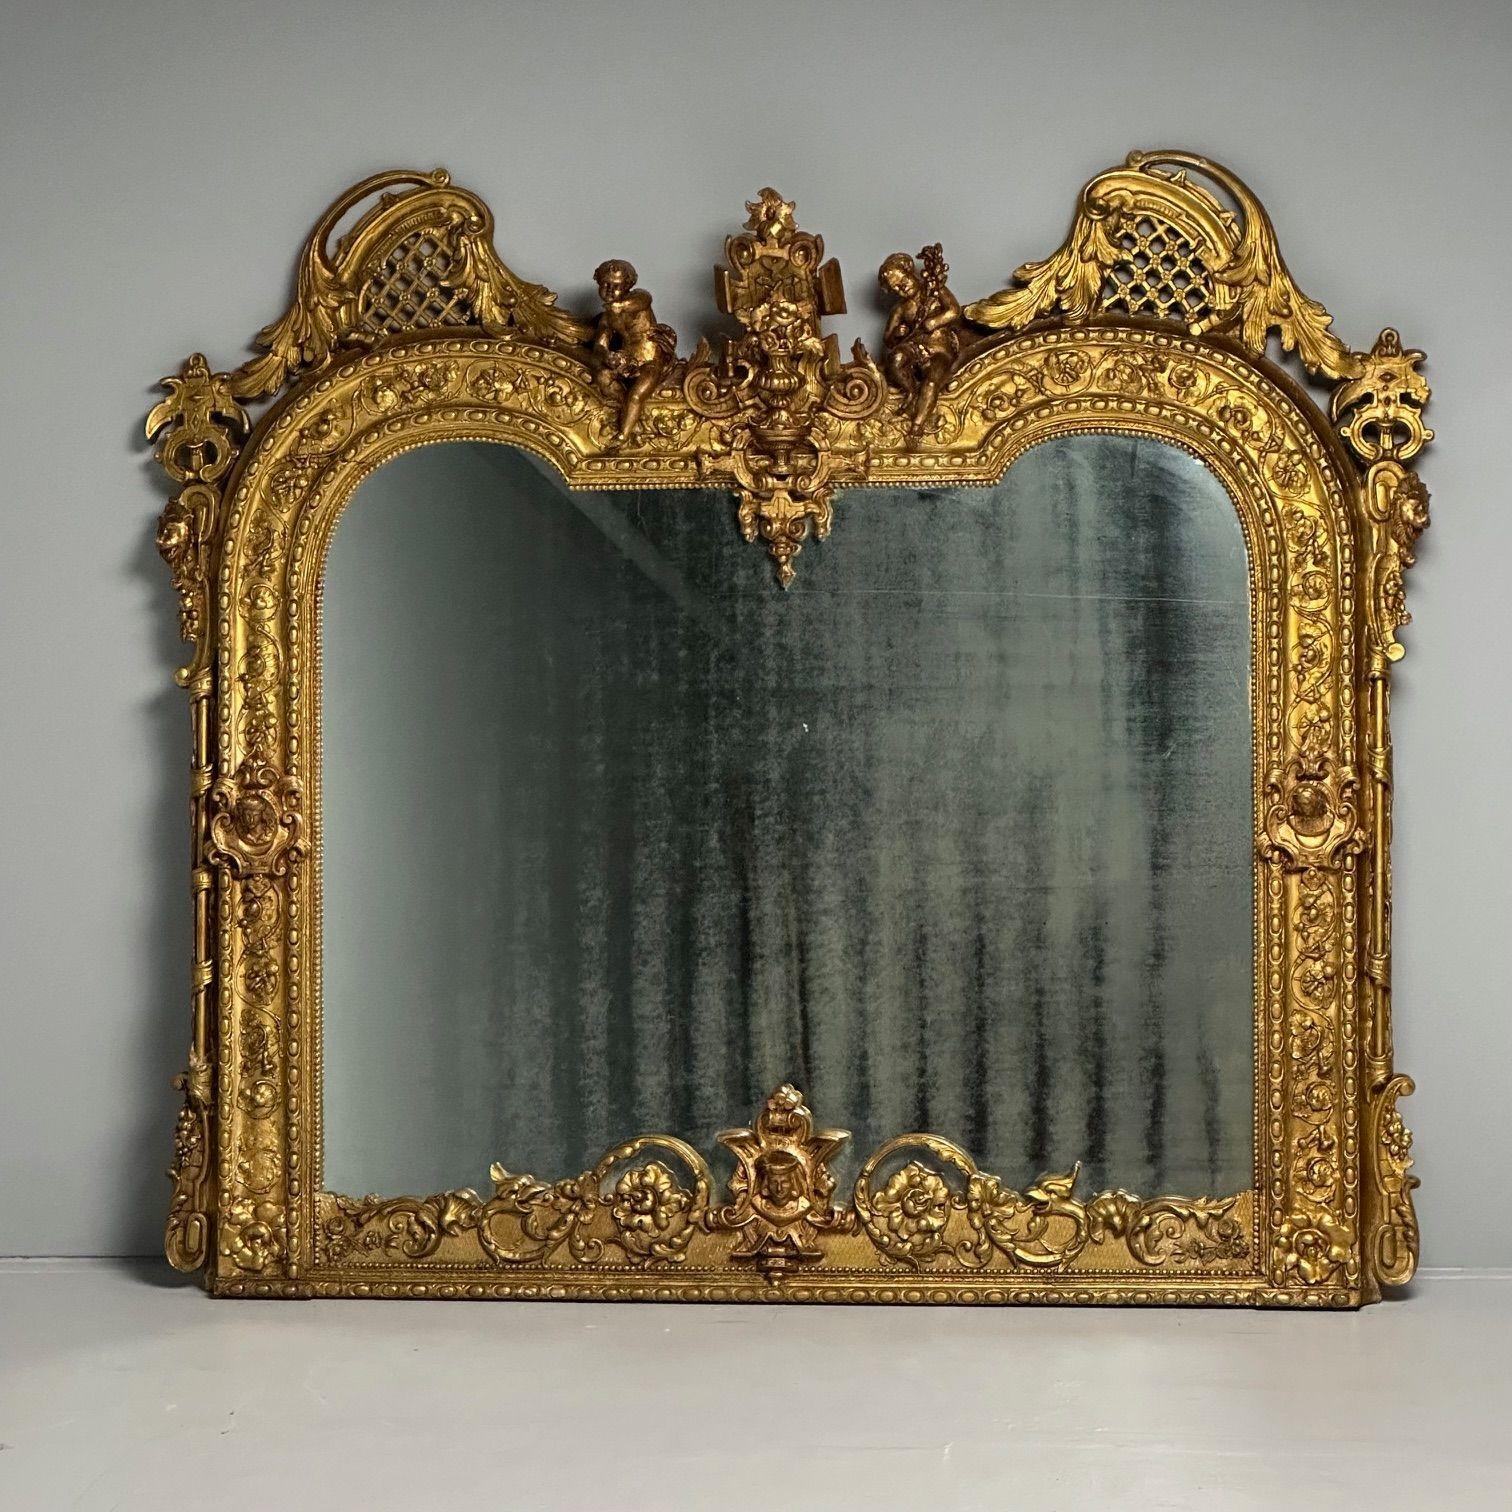 Over the Mantle or Wall Mirror, Oil Gilded, Italian Renaissance Style, Heavily Carved

A once in a lifetime opportunity to acquire a monumental wall, console or over the mantle mirror. This late 19th century mirror having a later mirror center place